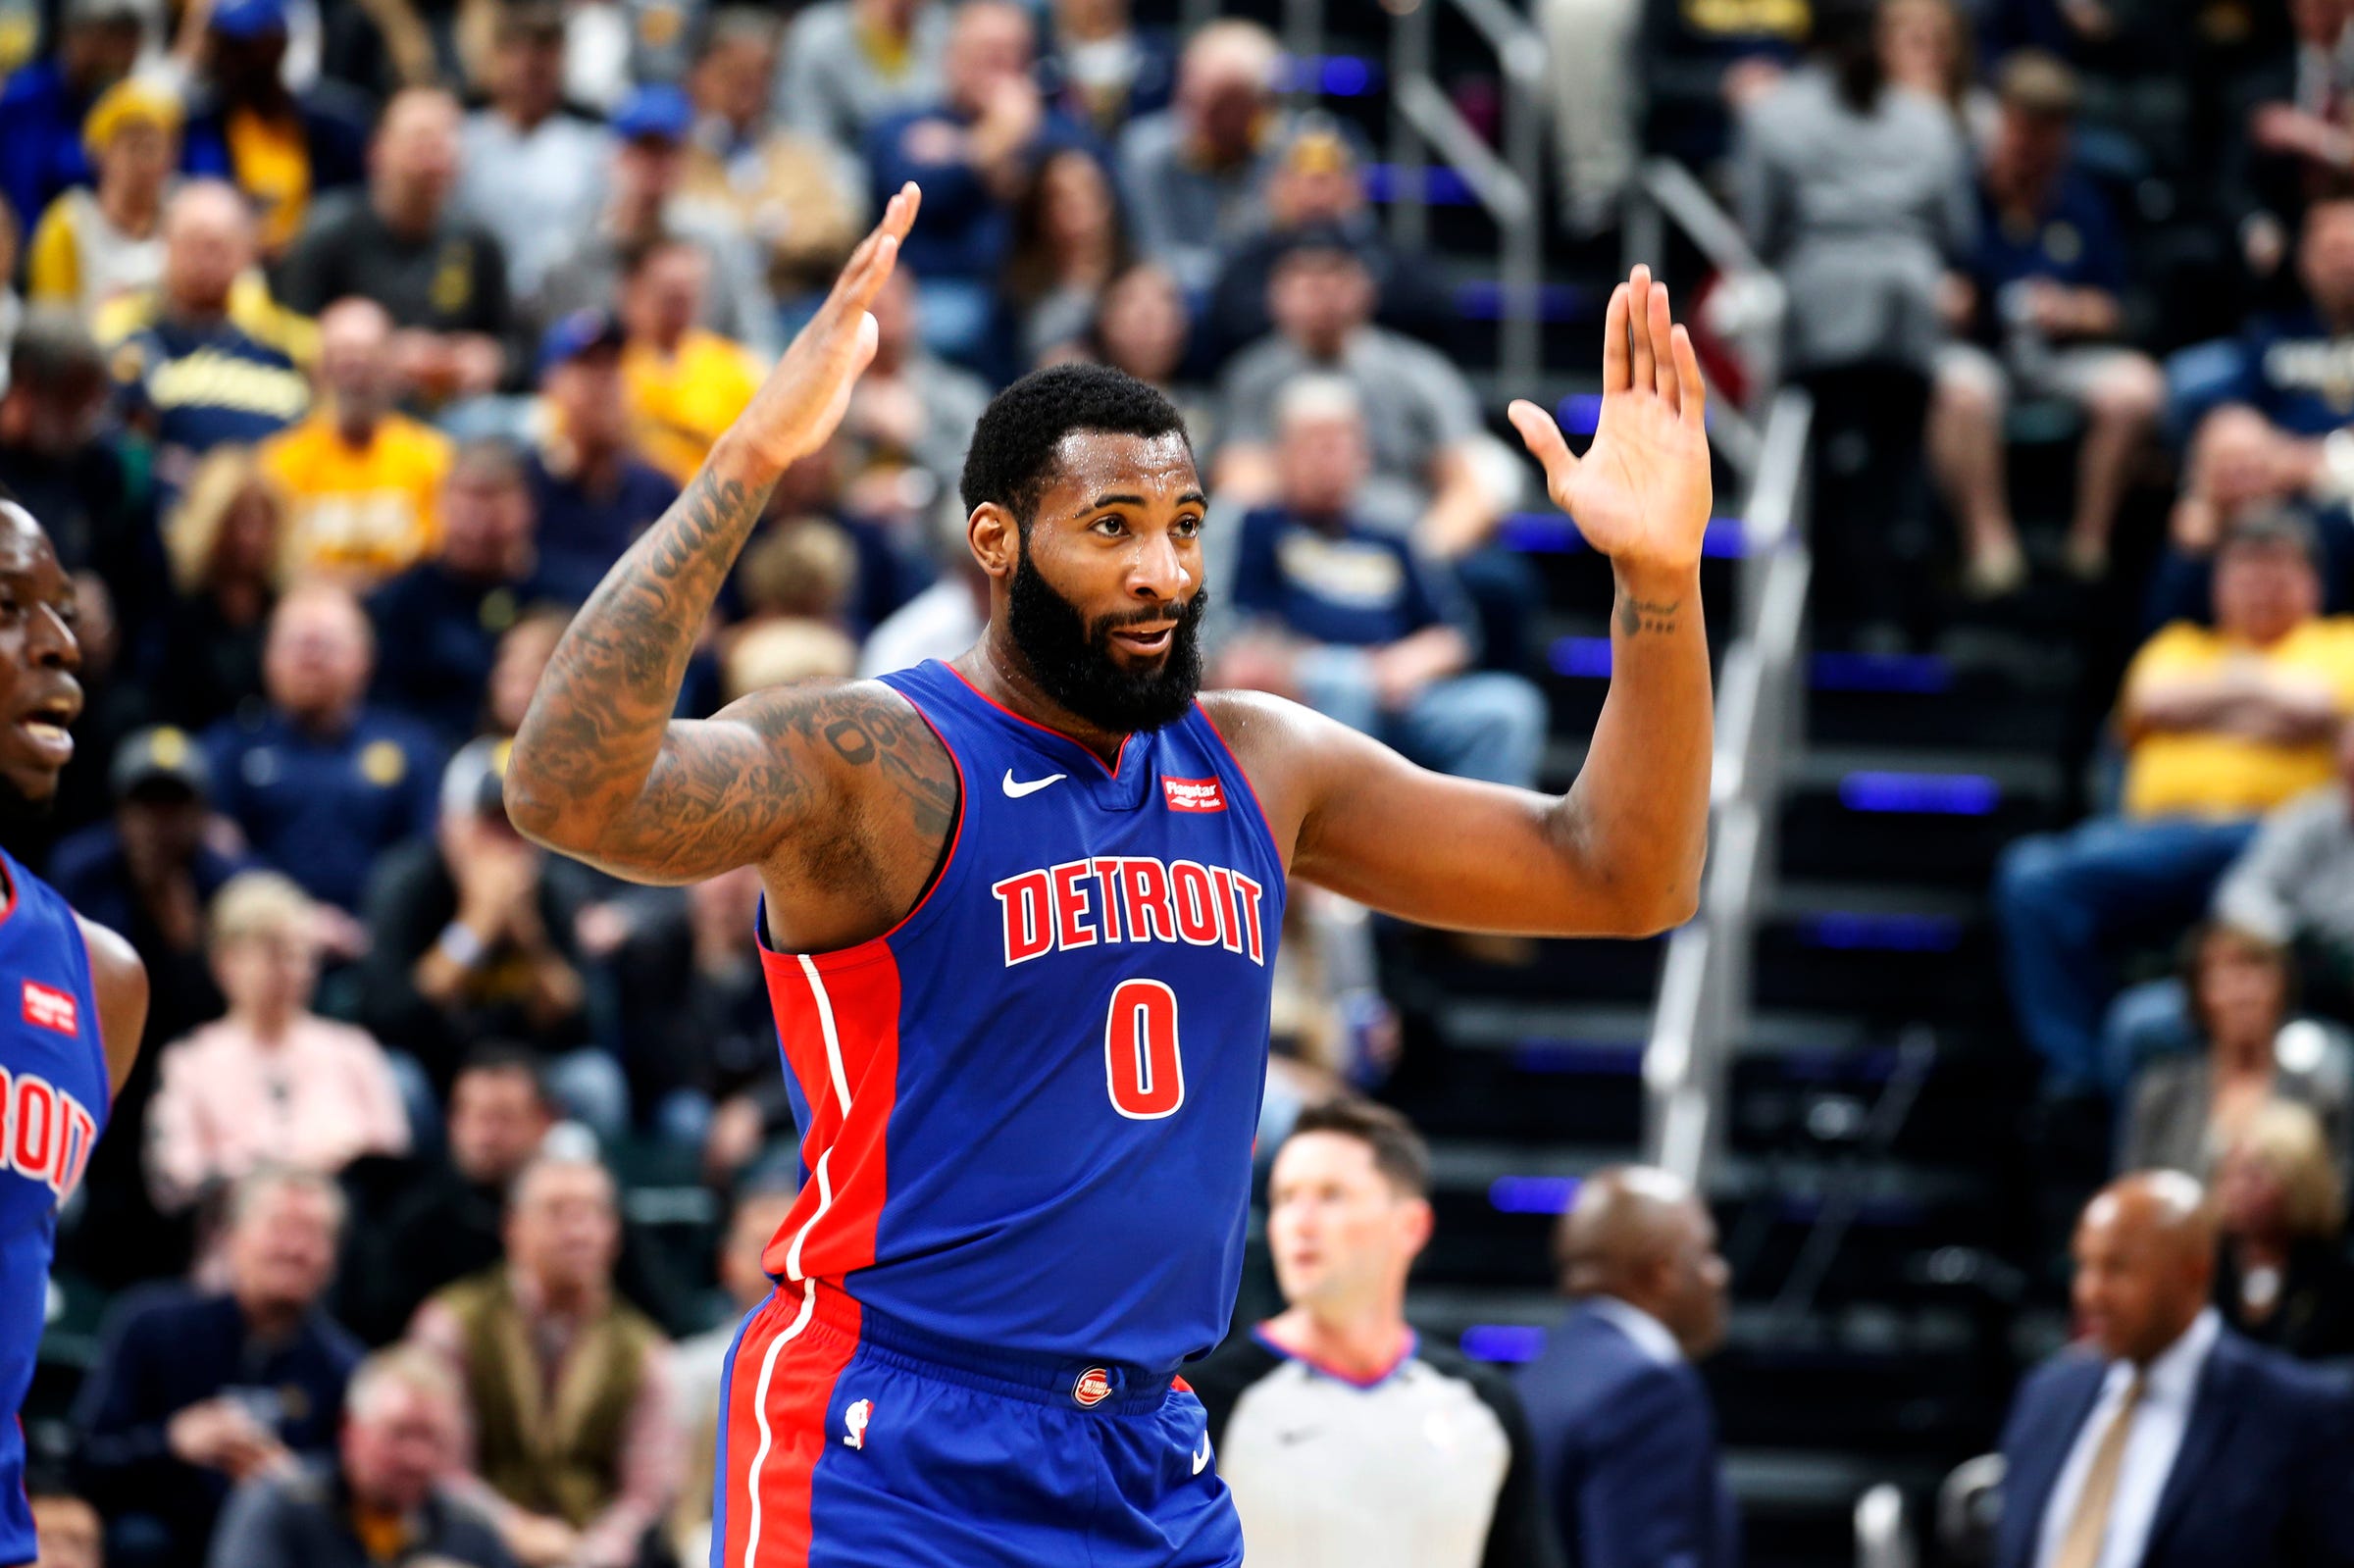 andre drummond usa jersey